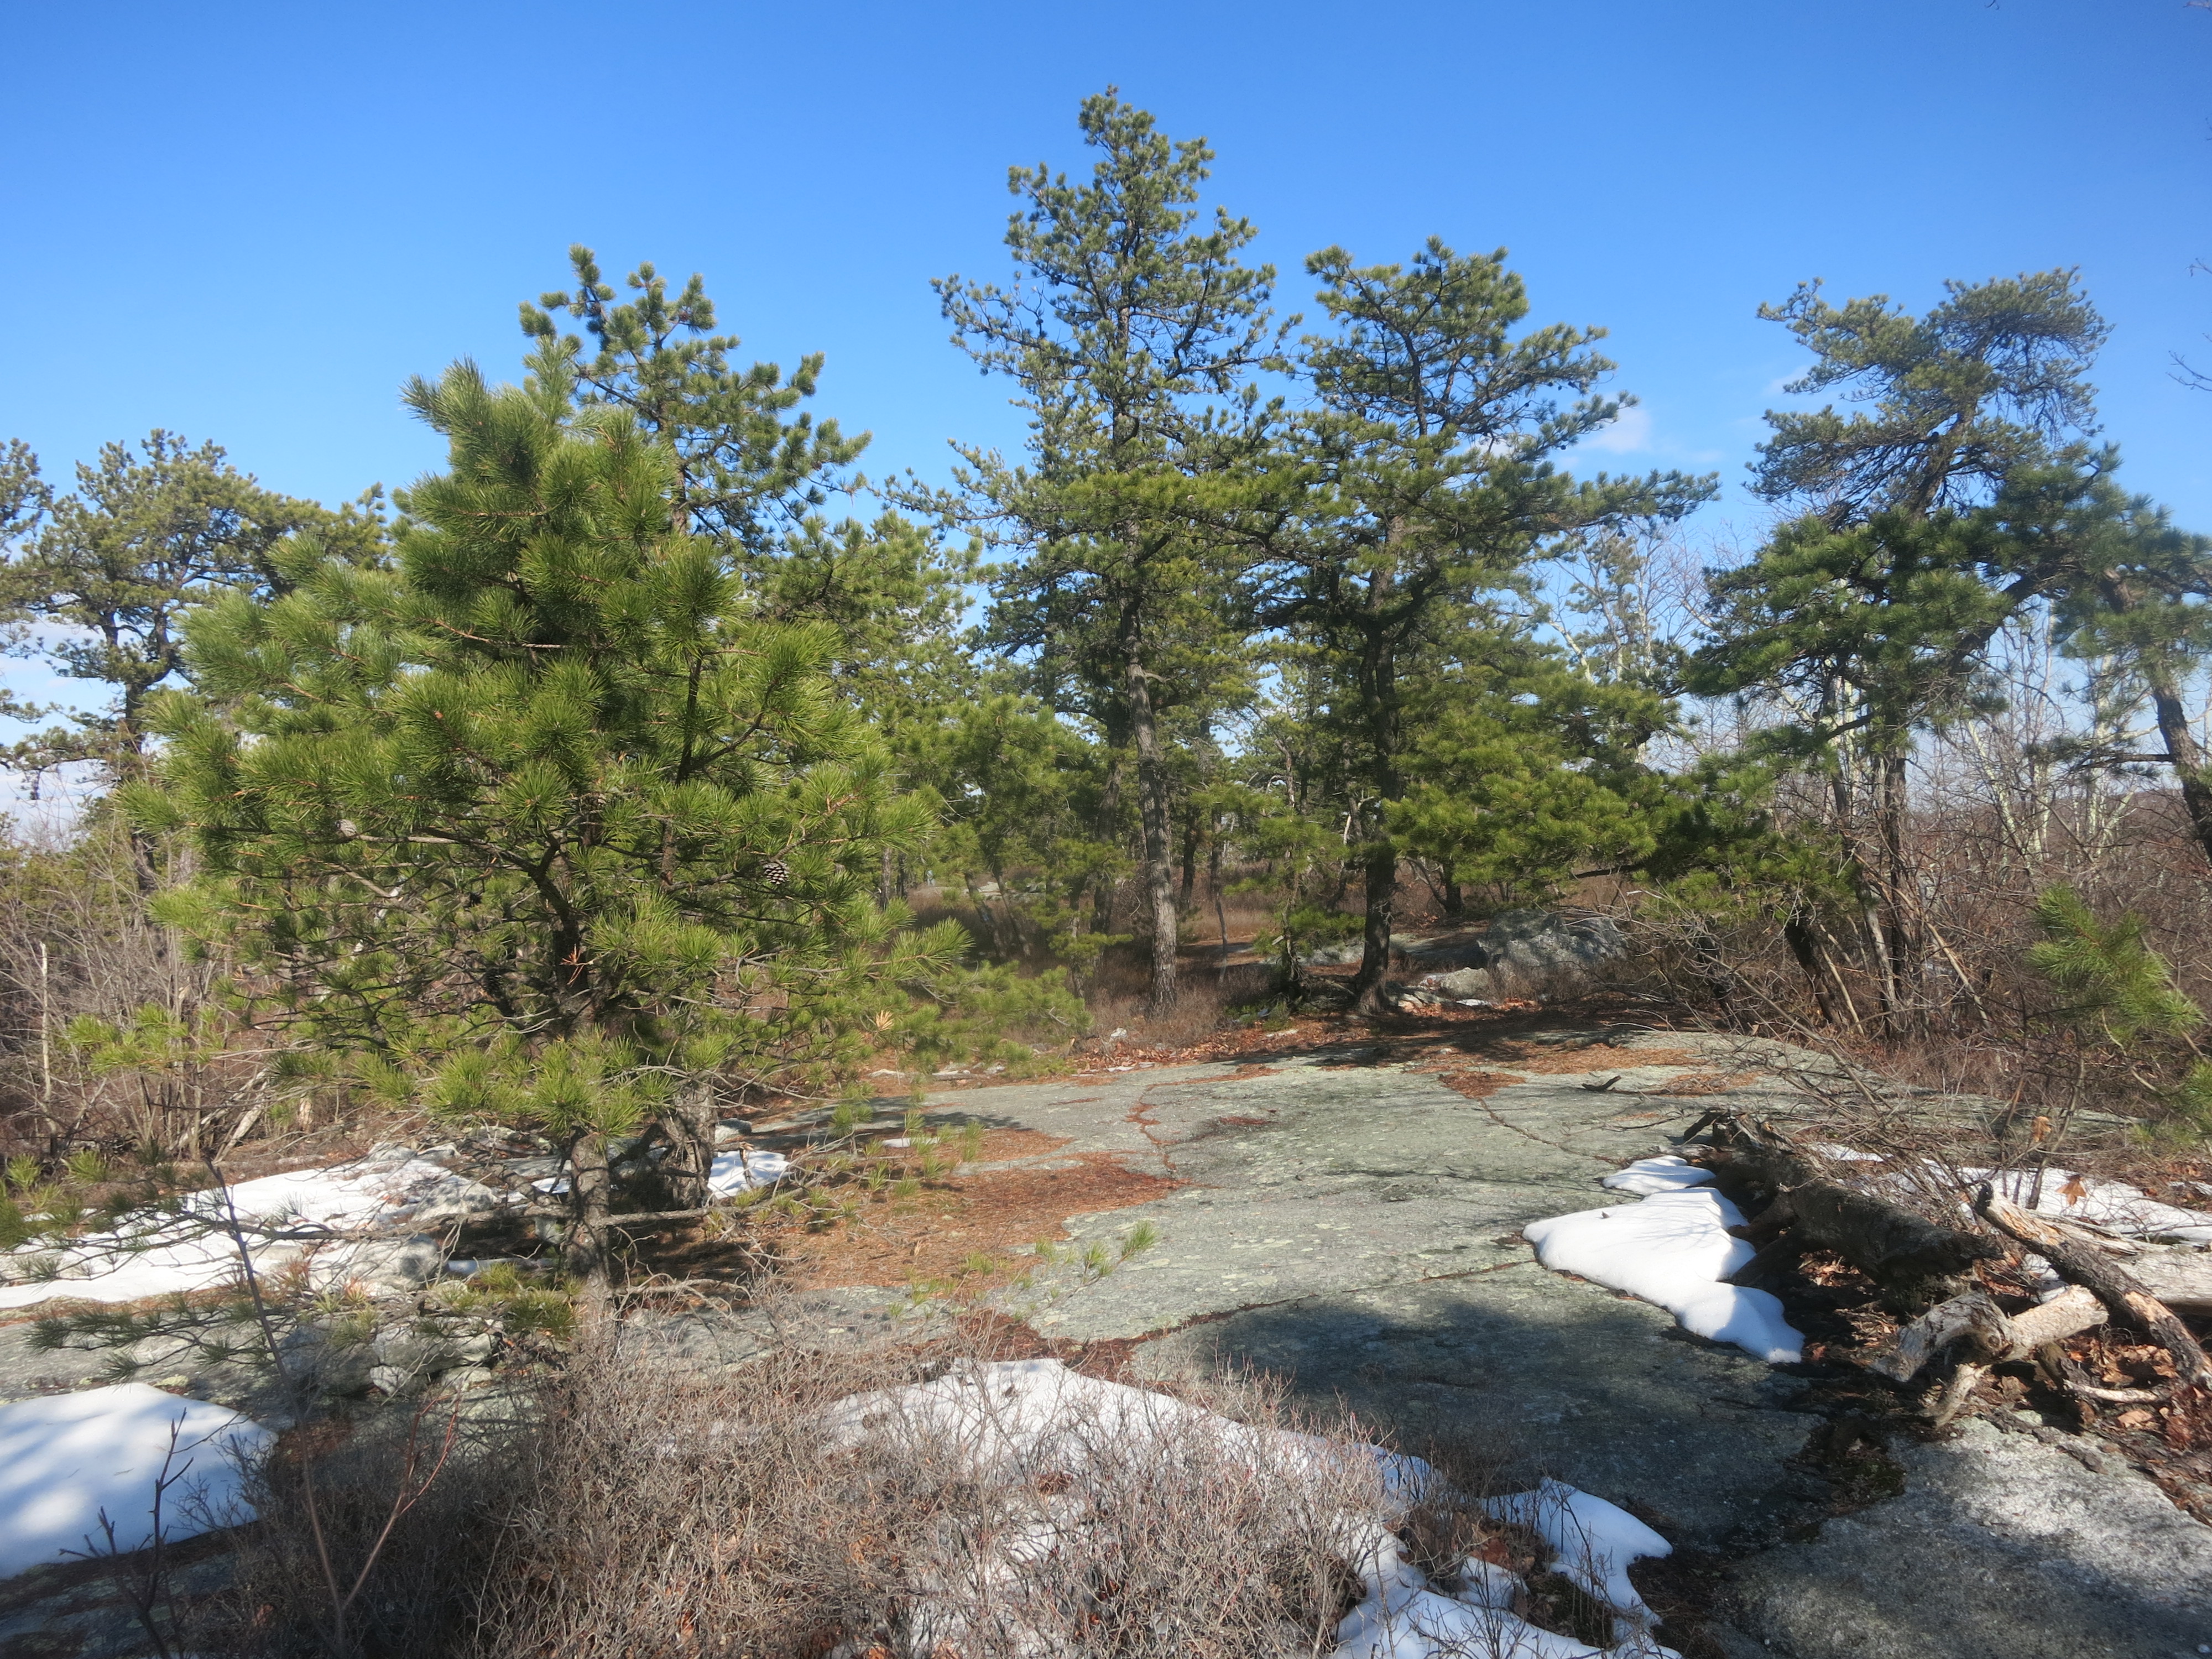 The Jenny Lane Trail in Minnewaska State Park Preserve as it proceeds over Shawangunk conglomerate slabs through pitch pines. Photo by Daniel Chazin.